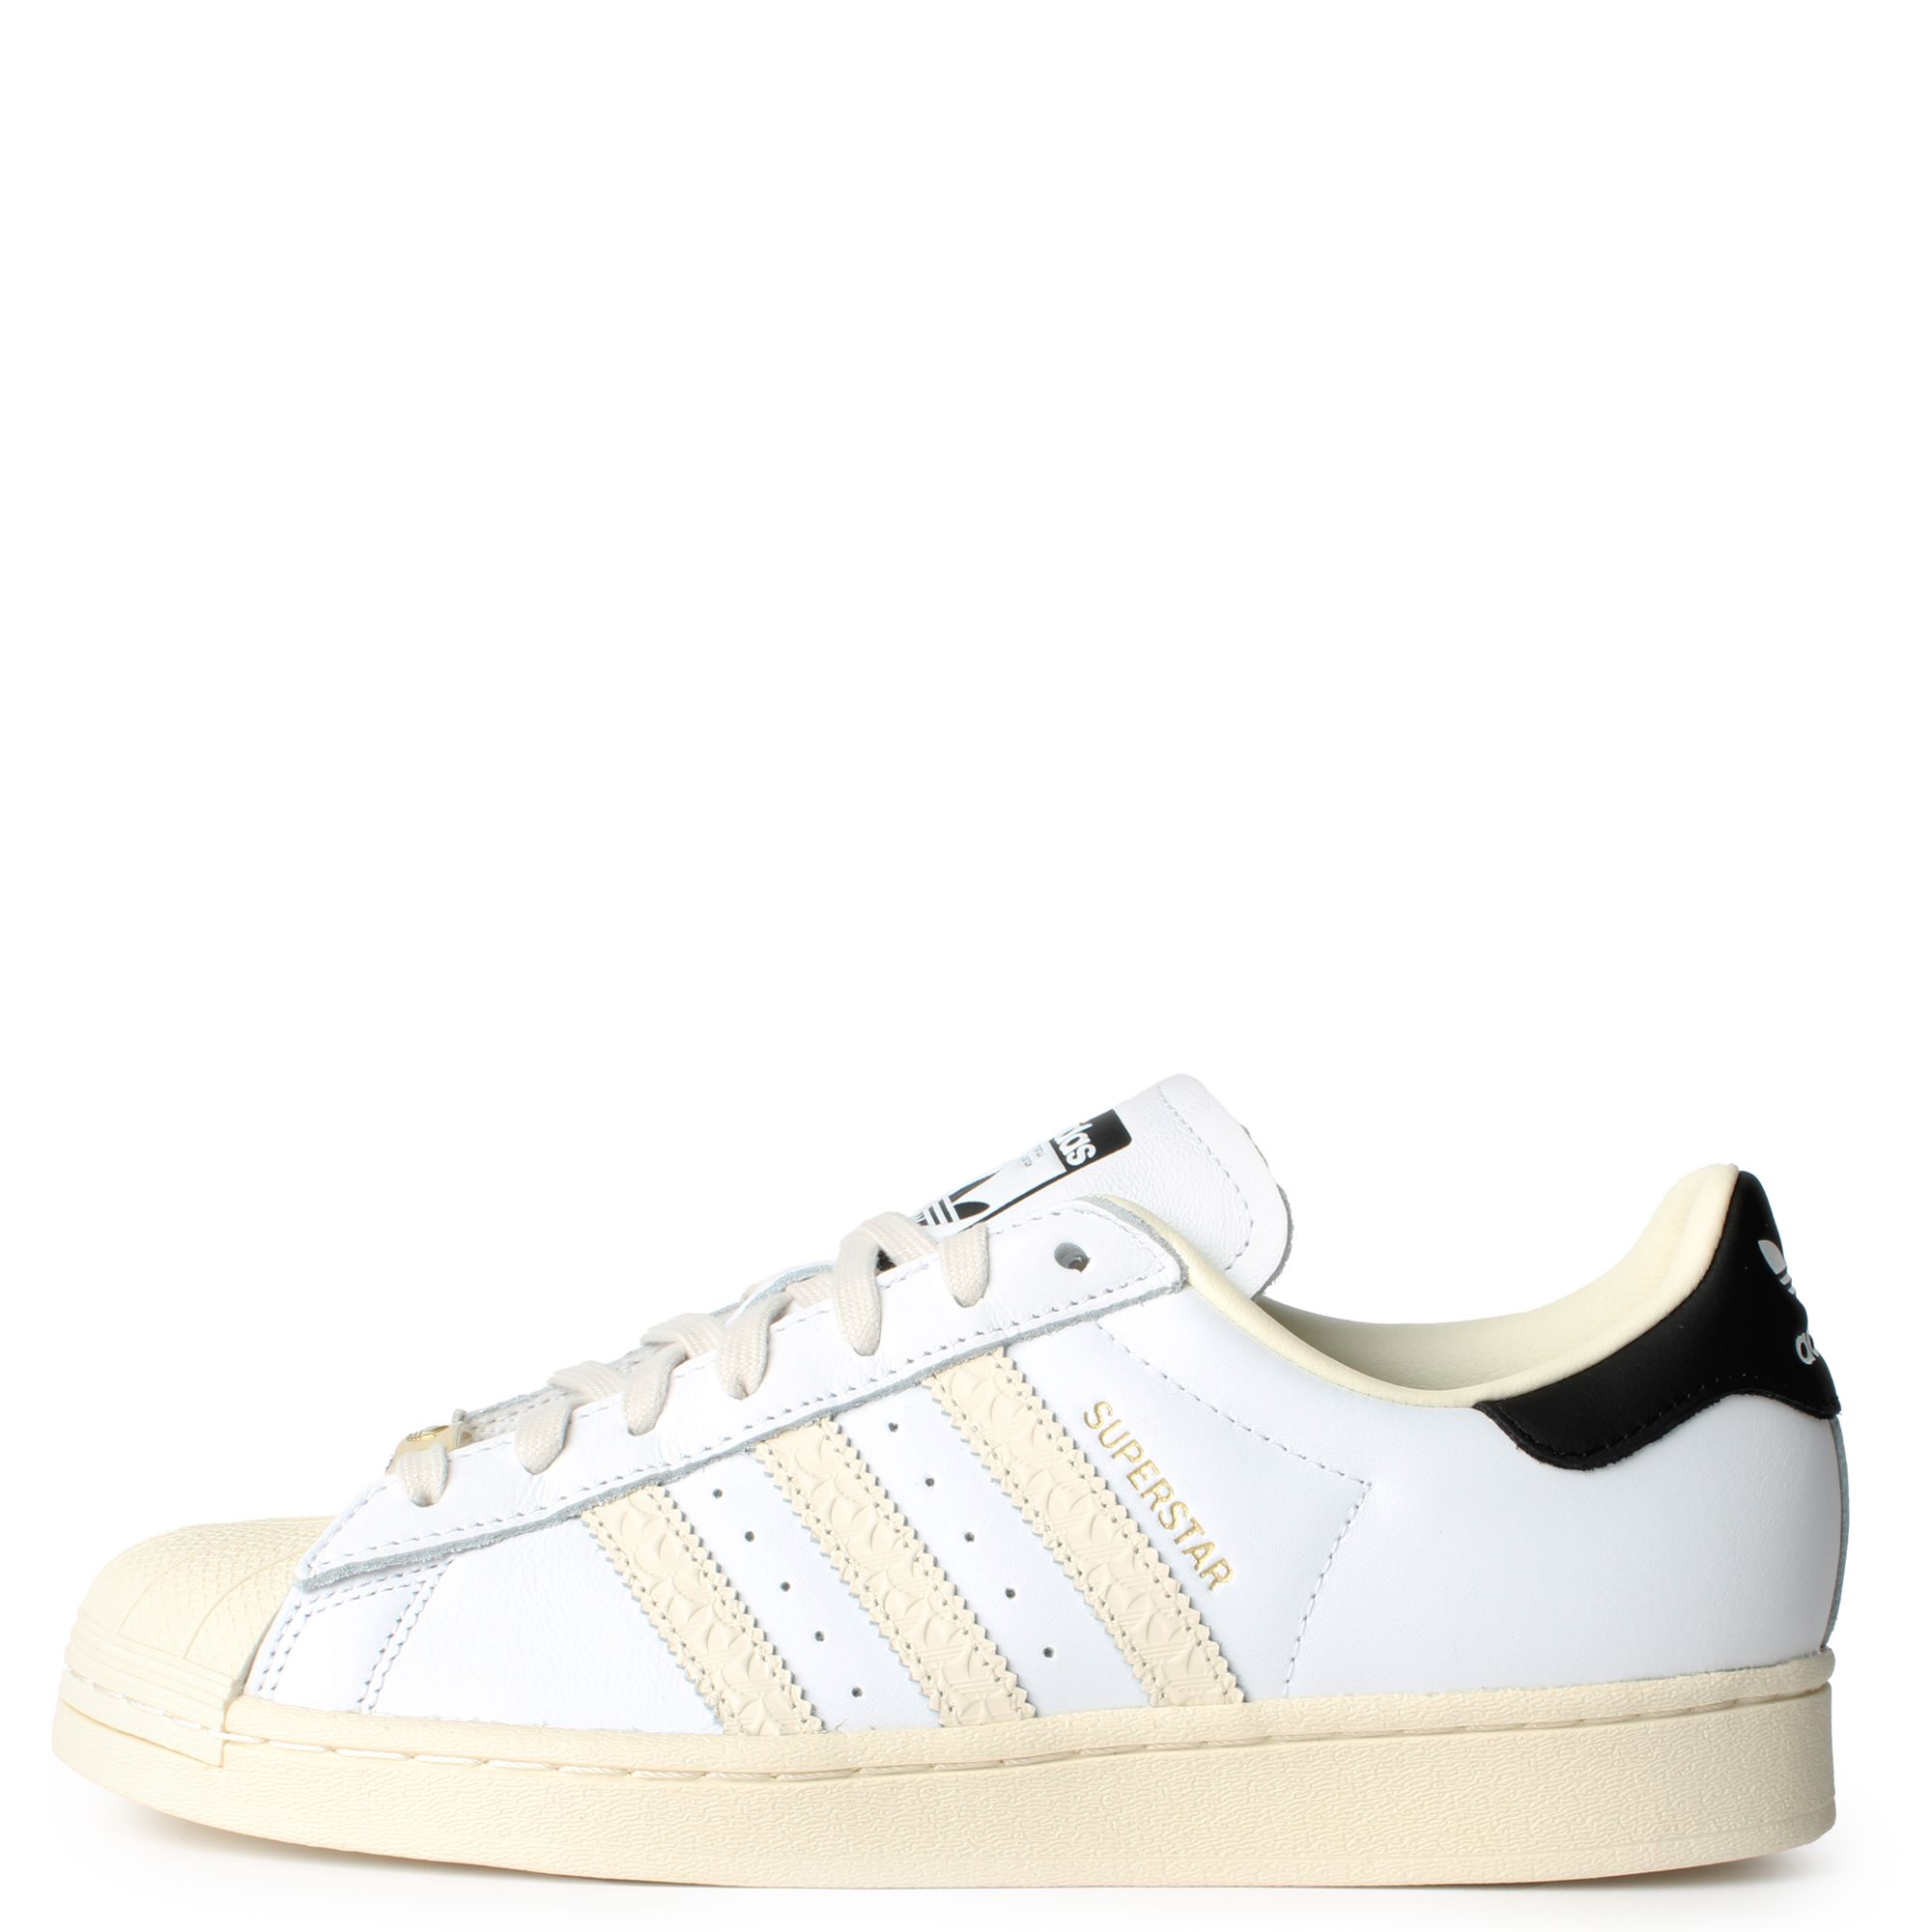 Adidas Superstar Xlg Men's Shoes in White/Blue/White Size 8 | WSS